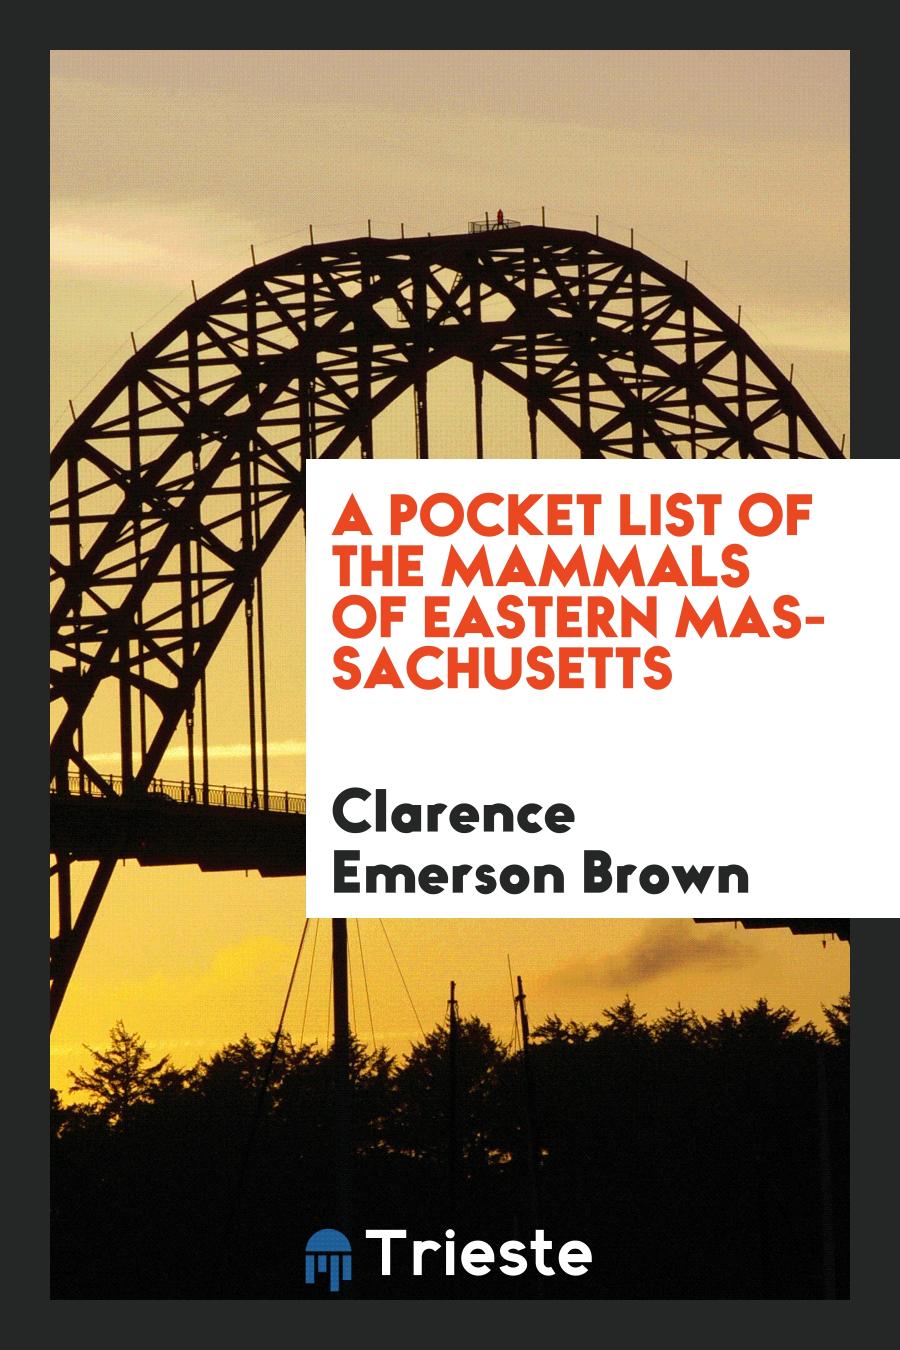 Clarence Emerson Brown - A pocket list of the mammals of Eastern Massachusetts